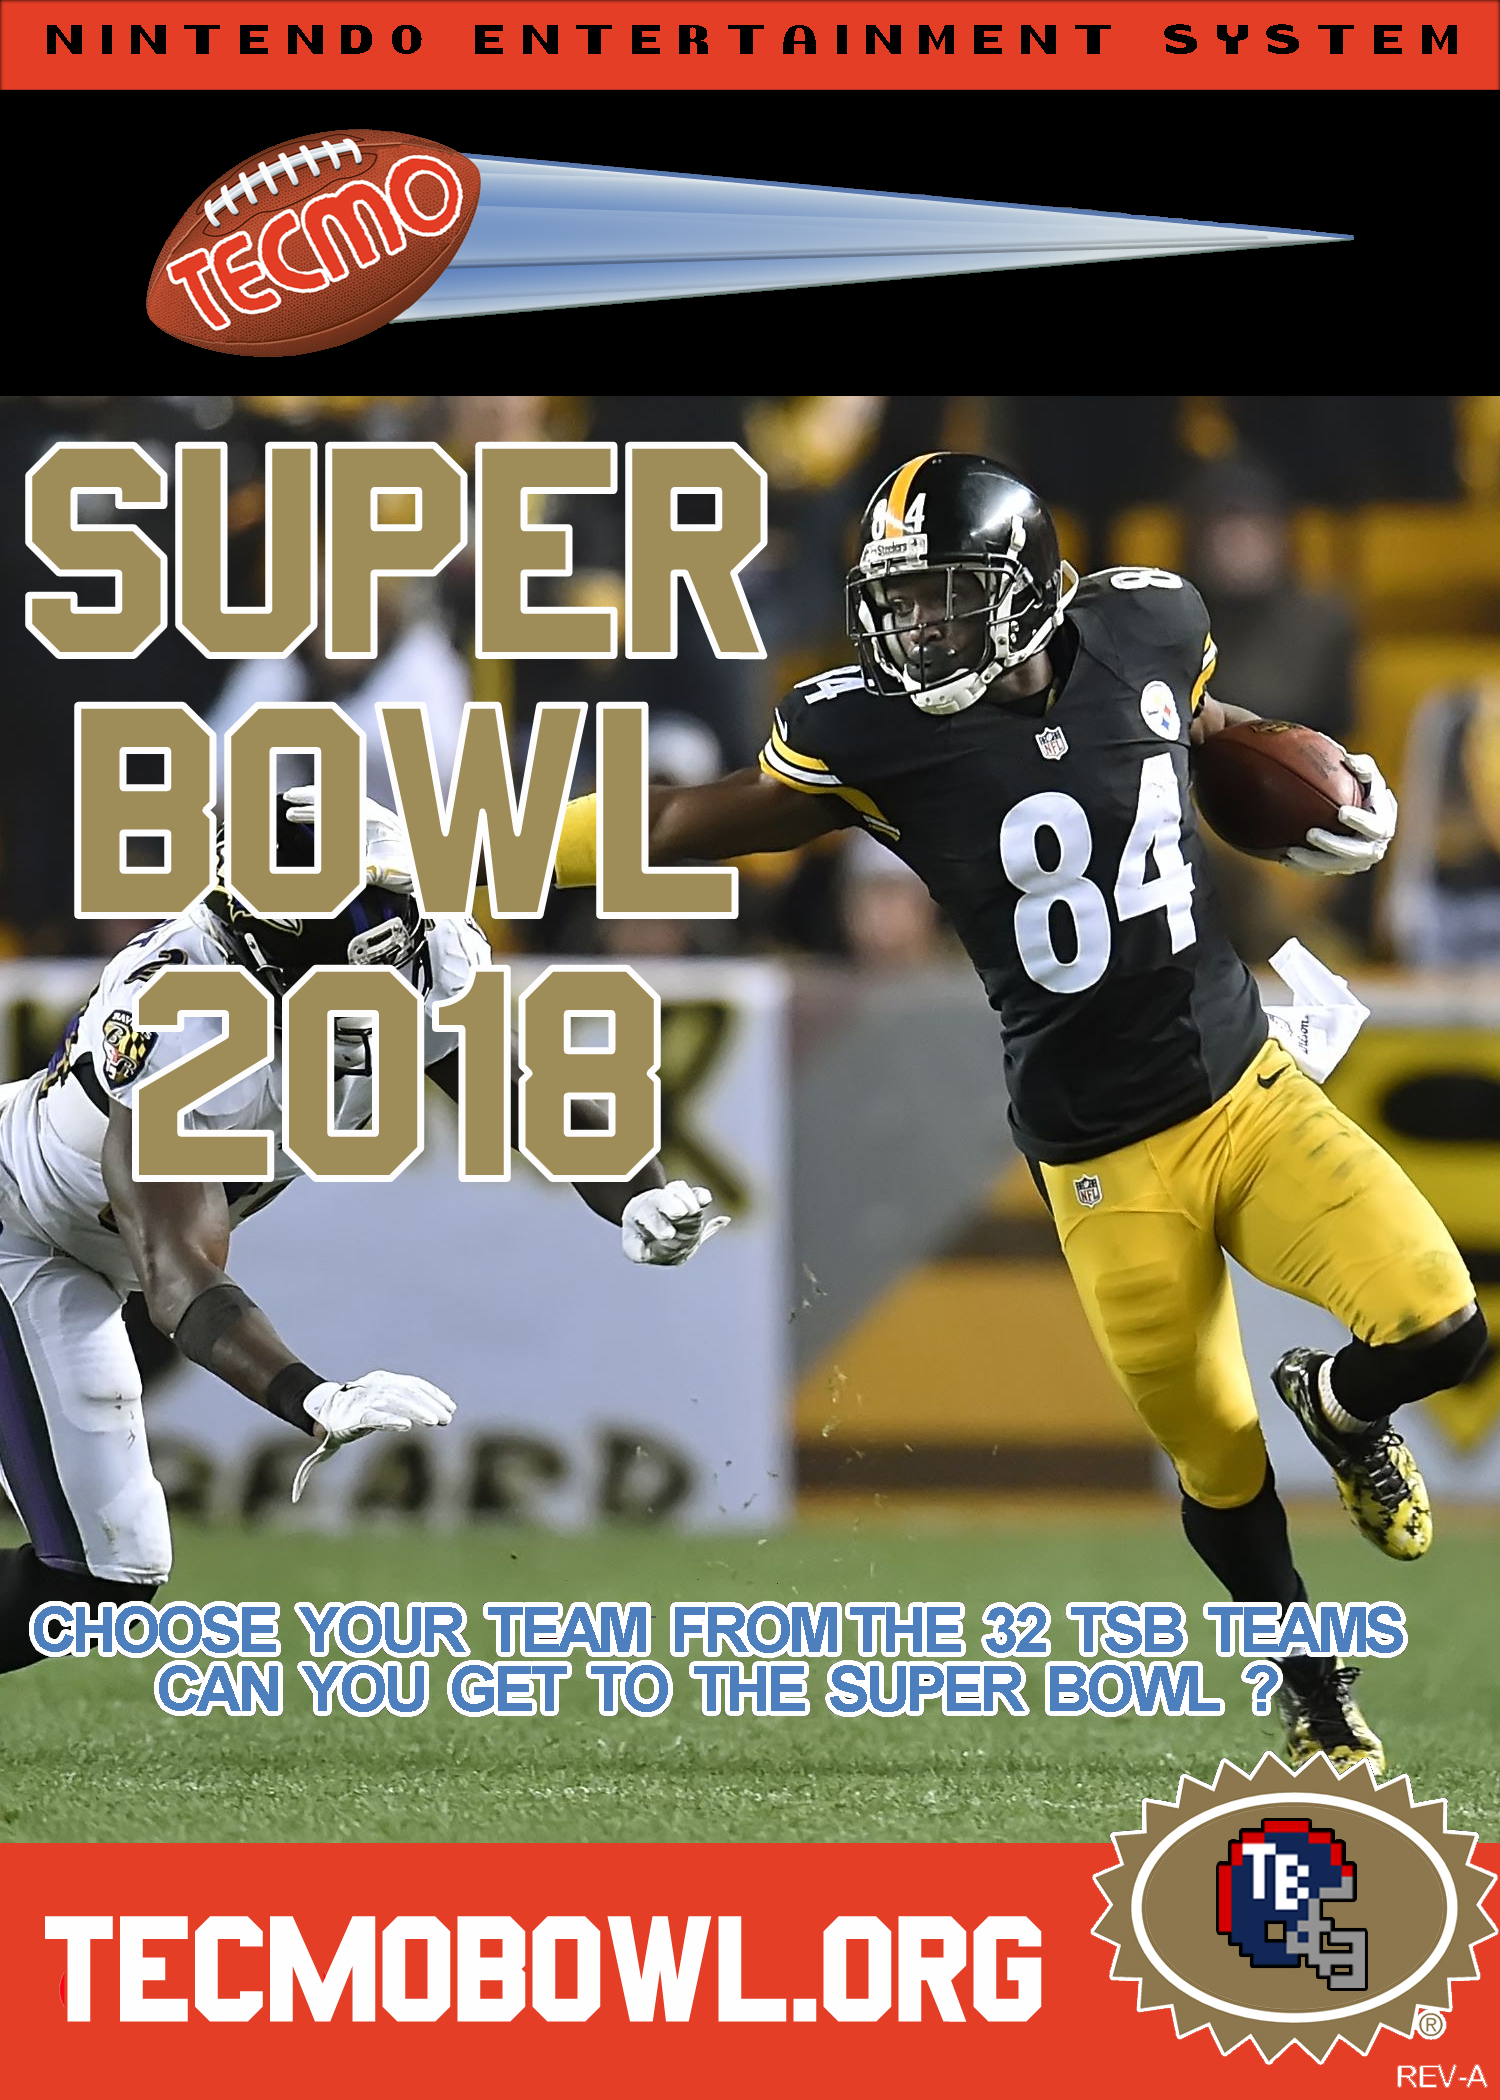 (NES) Tecmo Super Bowl 2018 Presented by TecmoBowl.org - Download Support - TecmoBowl.org1500 x 2100